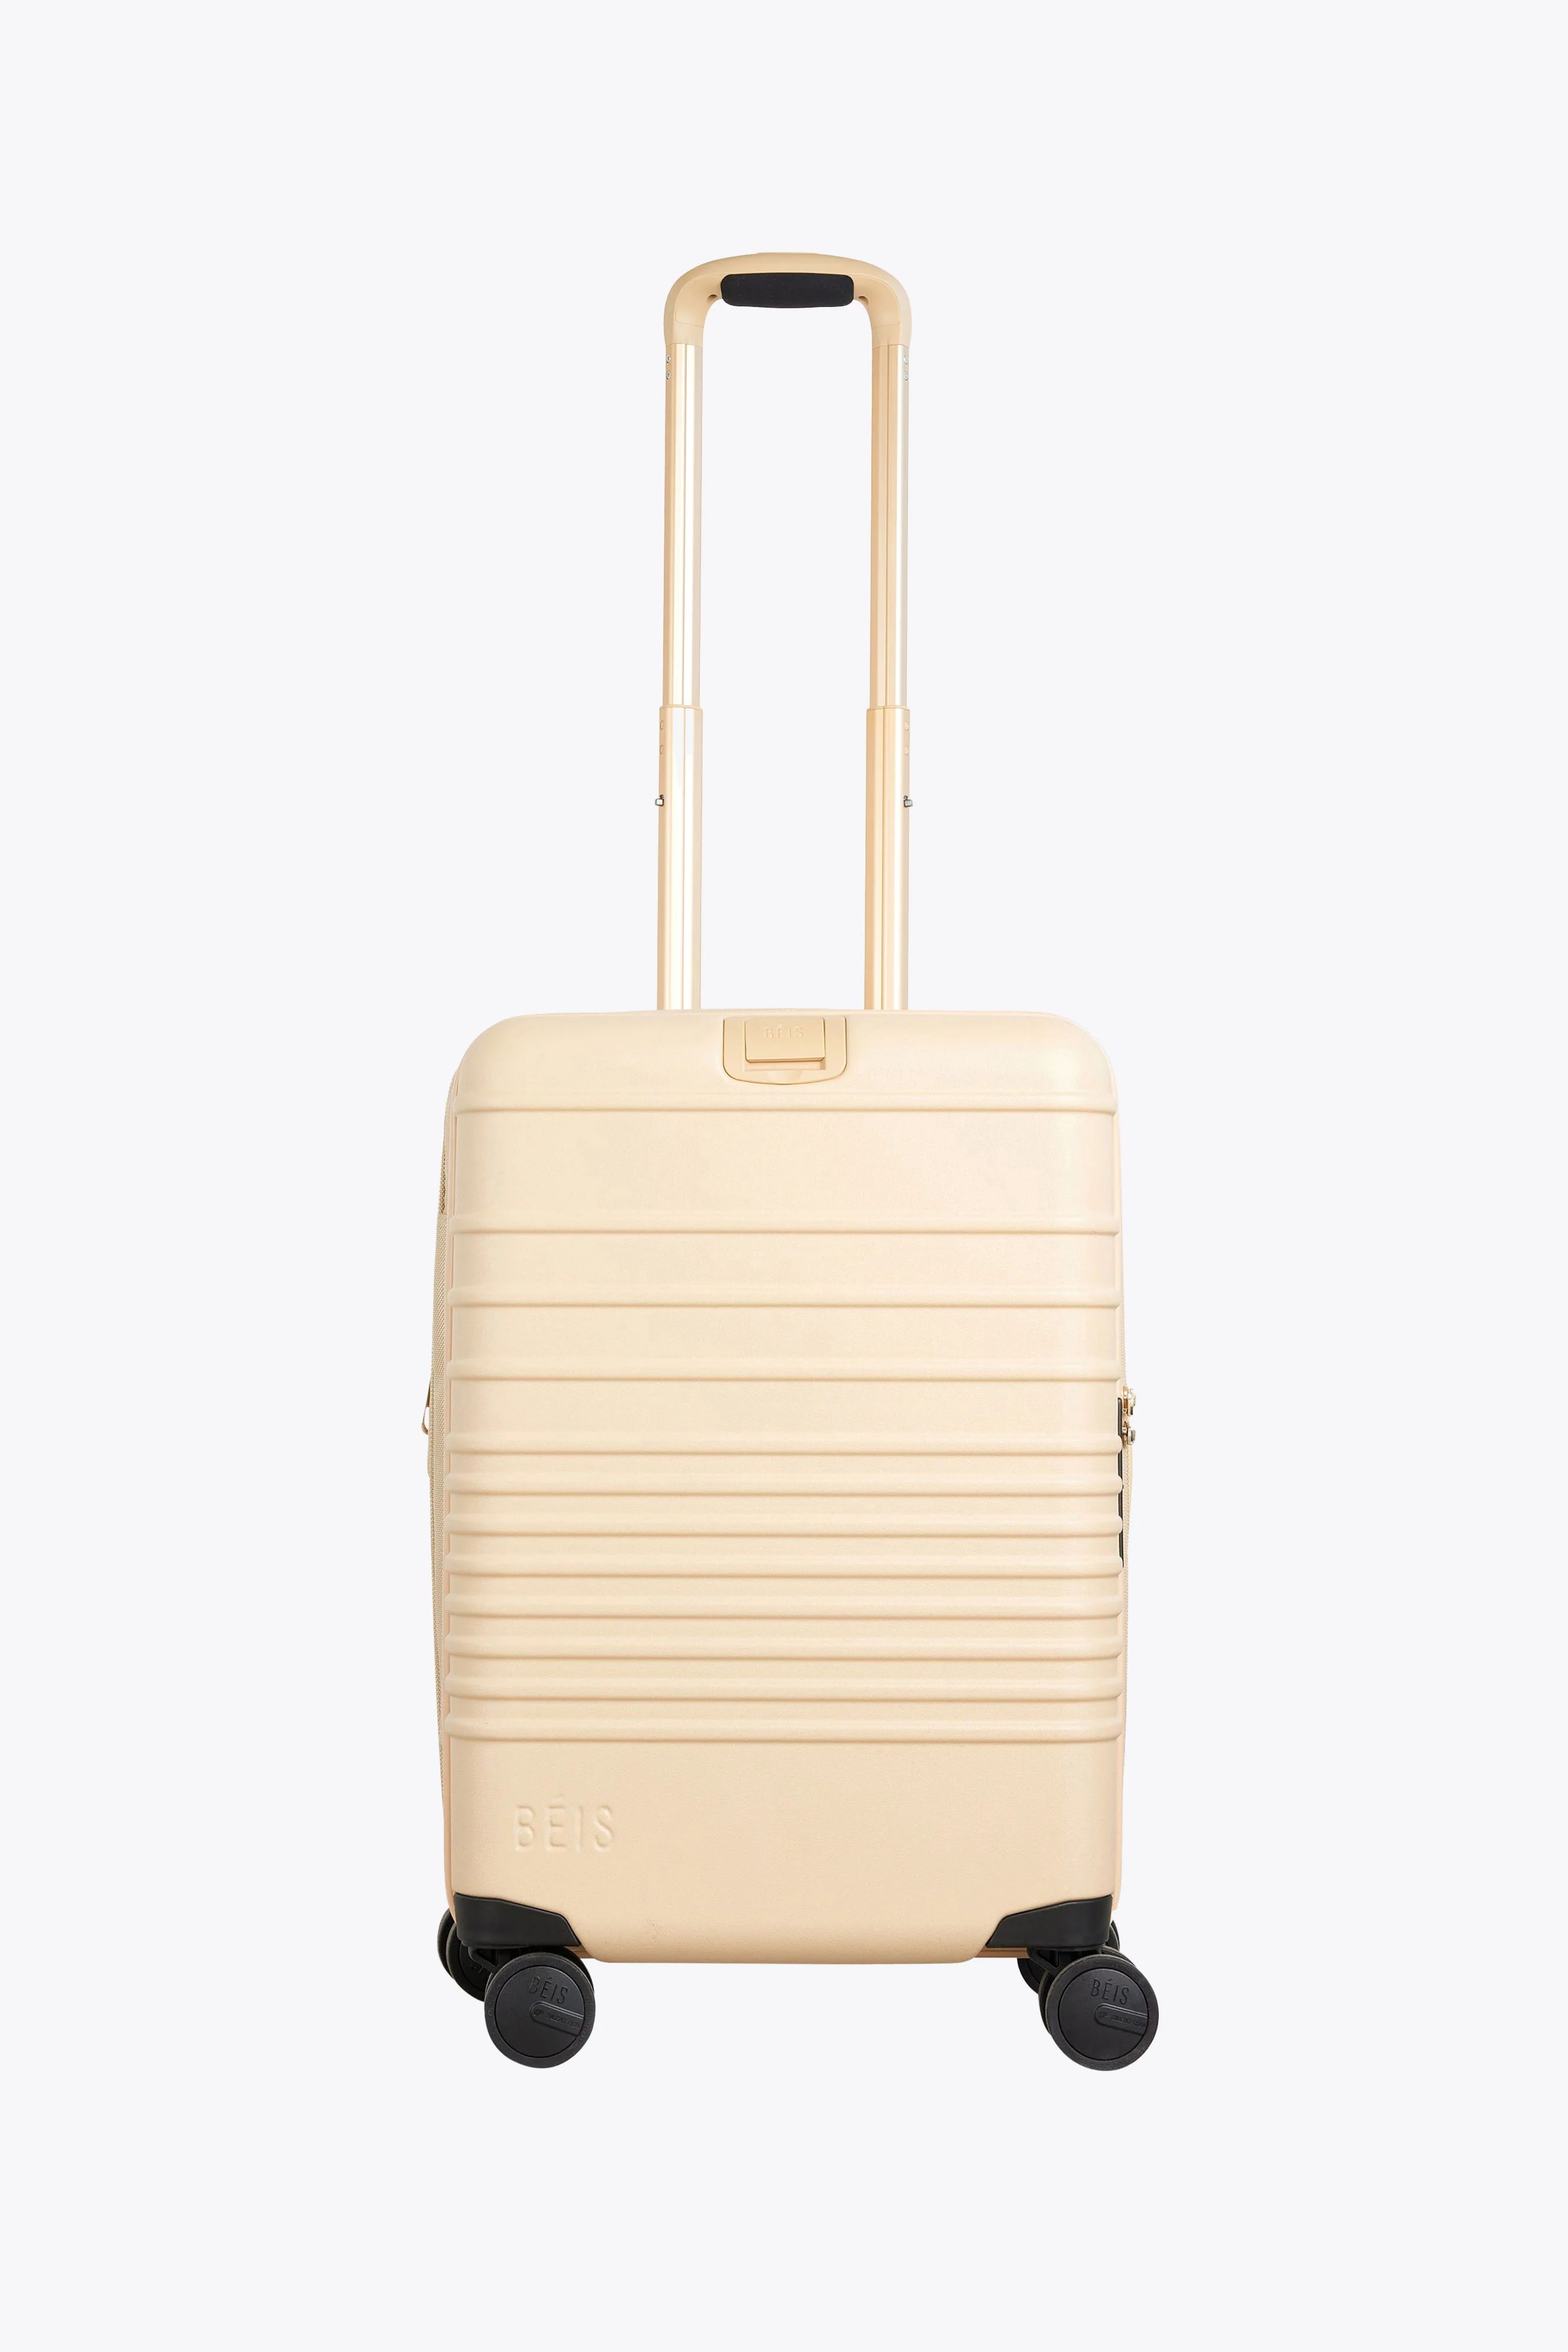 BÉIS 'The Carry-On Roller' in Beige - 21" Carry On Rolling Luggage & Suitcase | BÉIS Travel